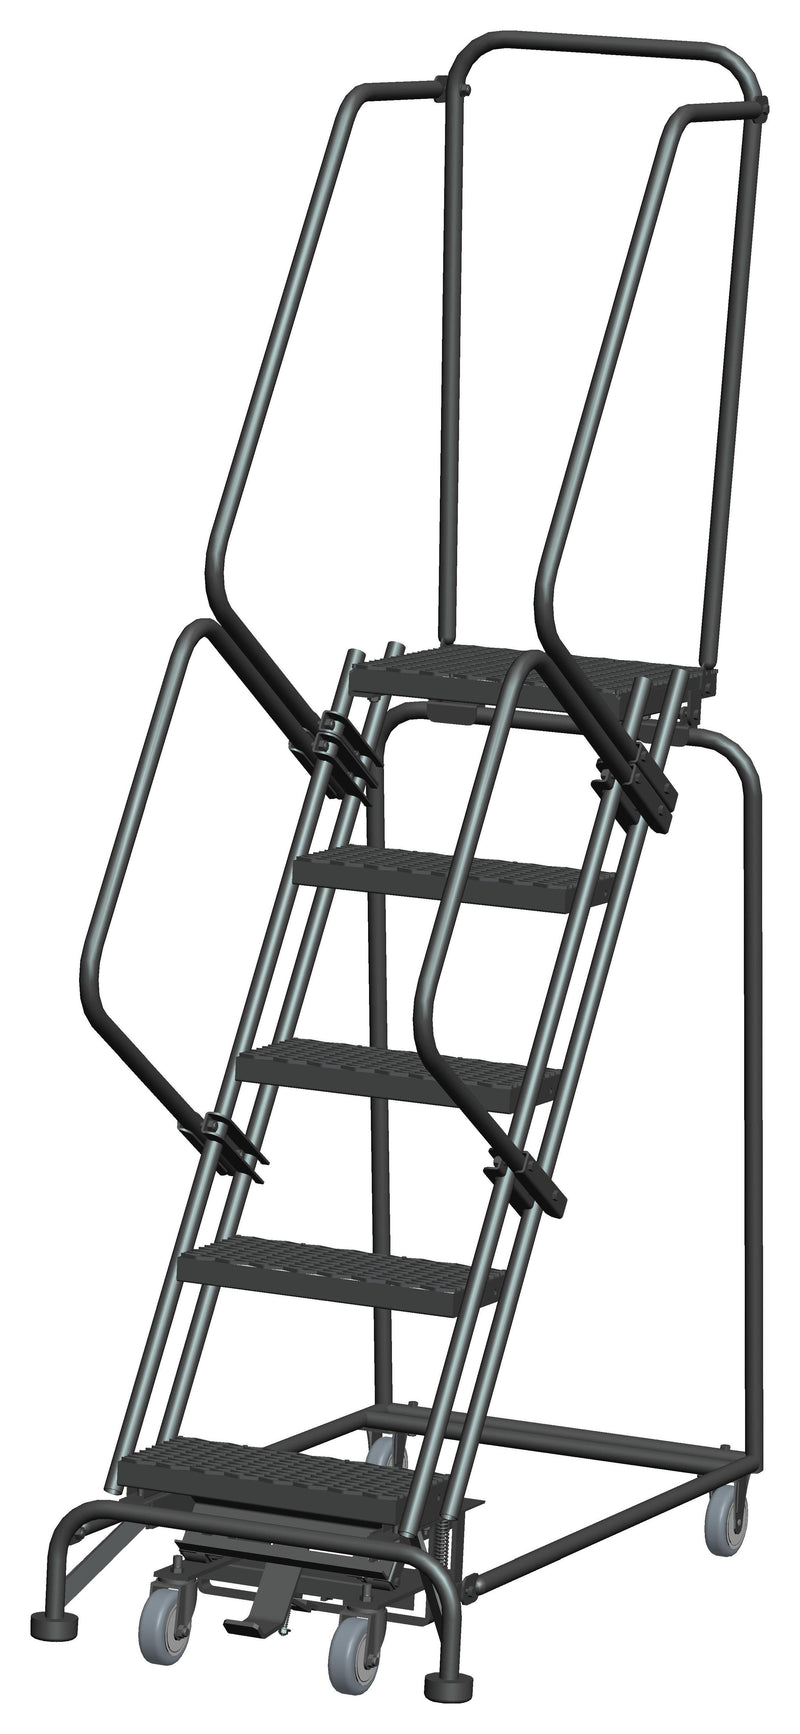 Rolling Ladder - Weight-Actuated - 5 Step, Handrails - Ballymore